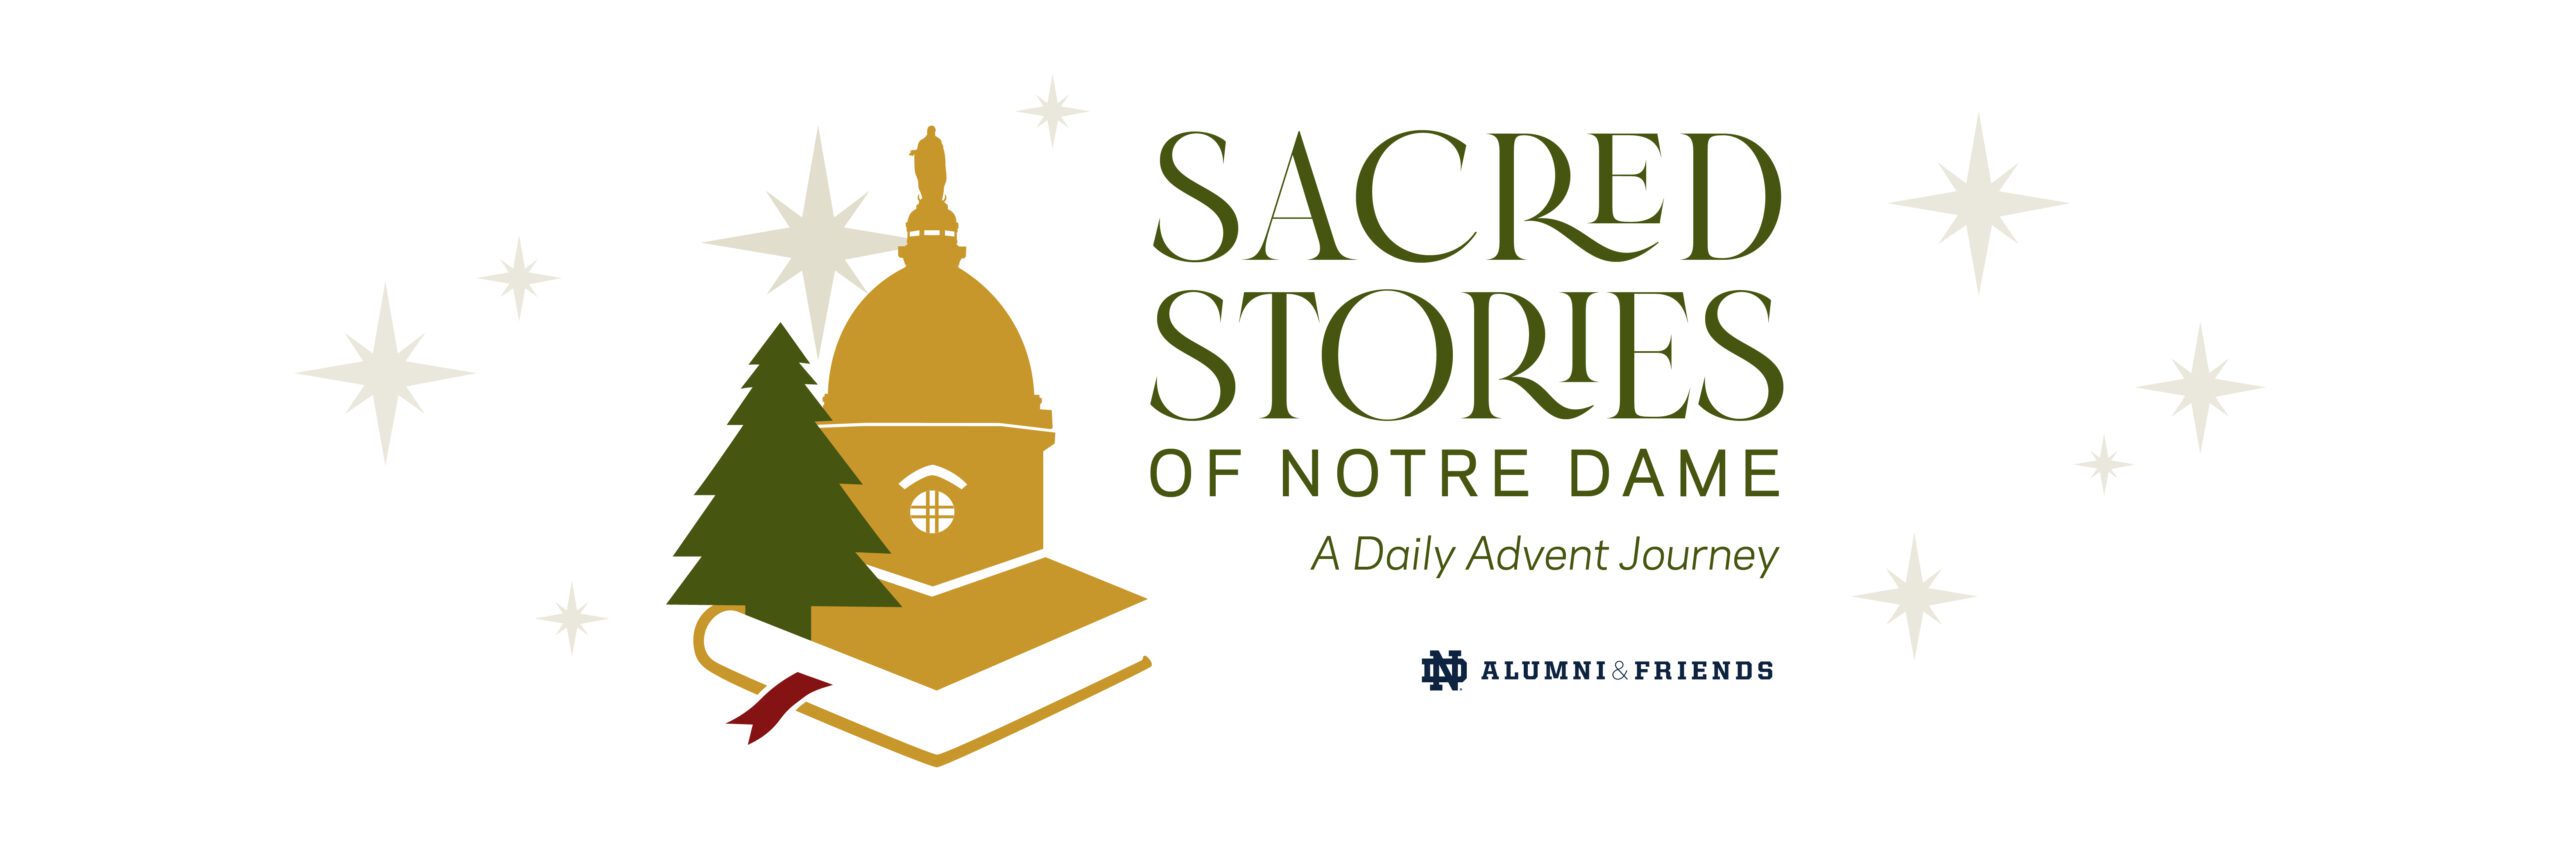 Sacred Stories of Notre Dame: A Daily Advent Journey